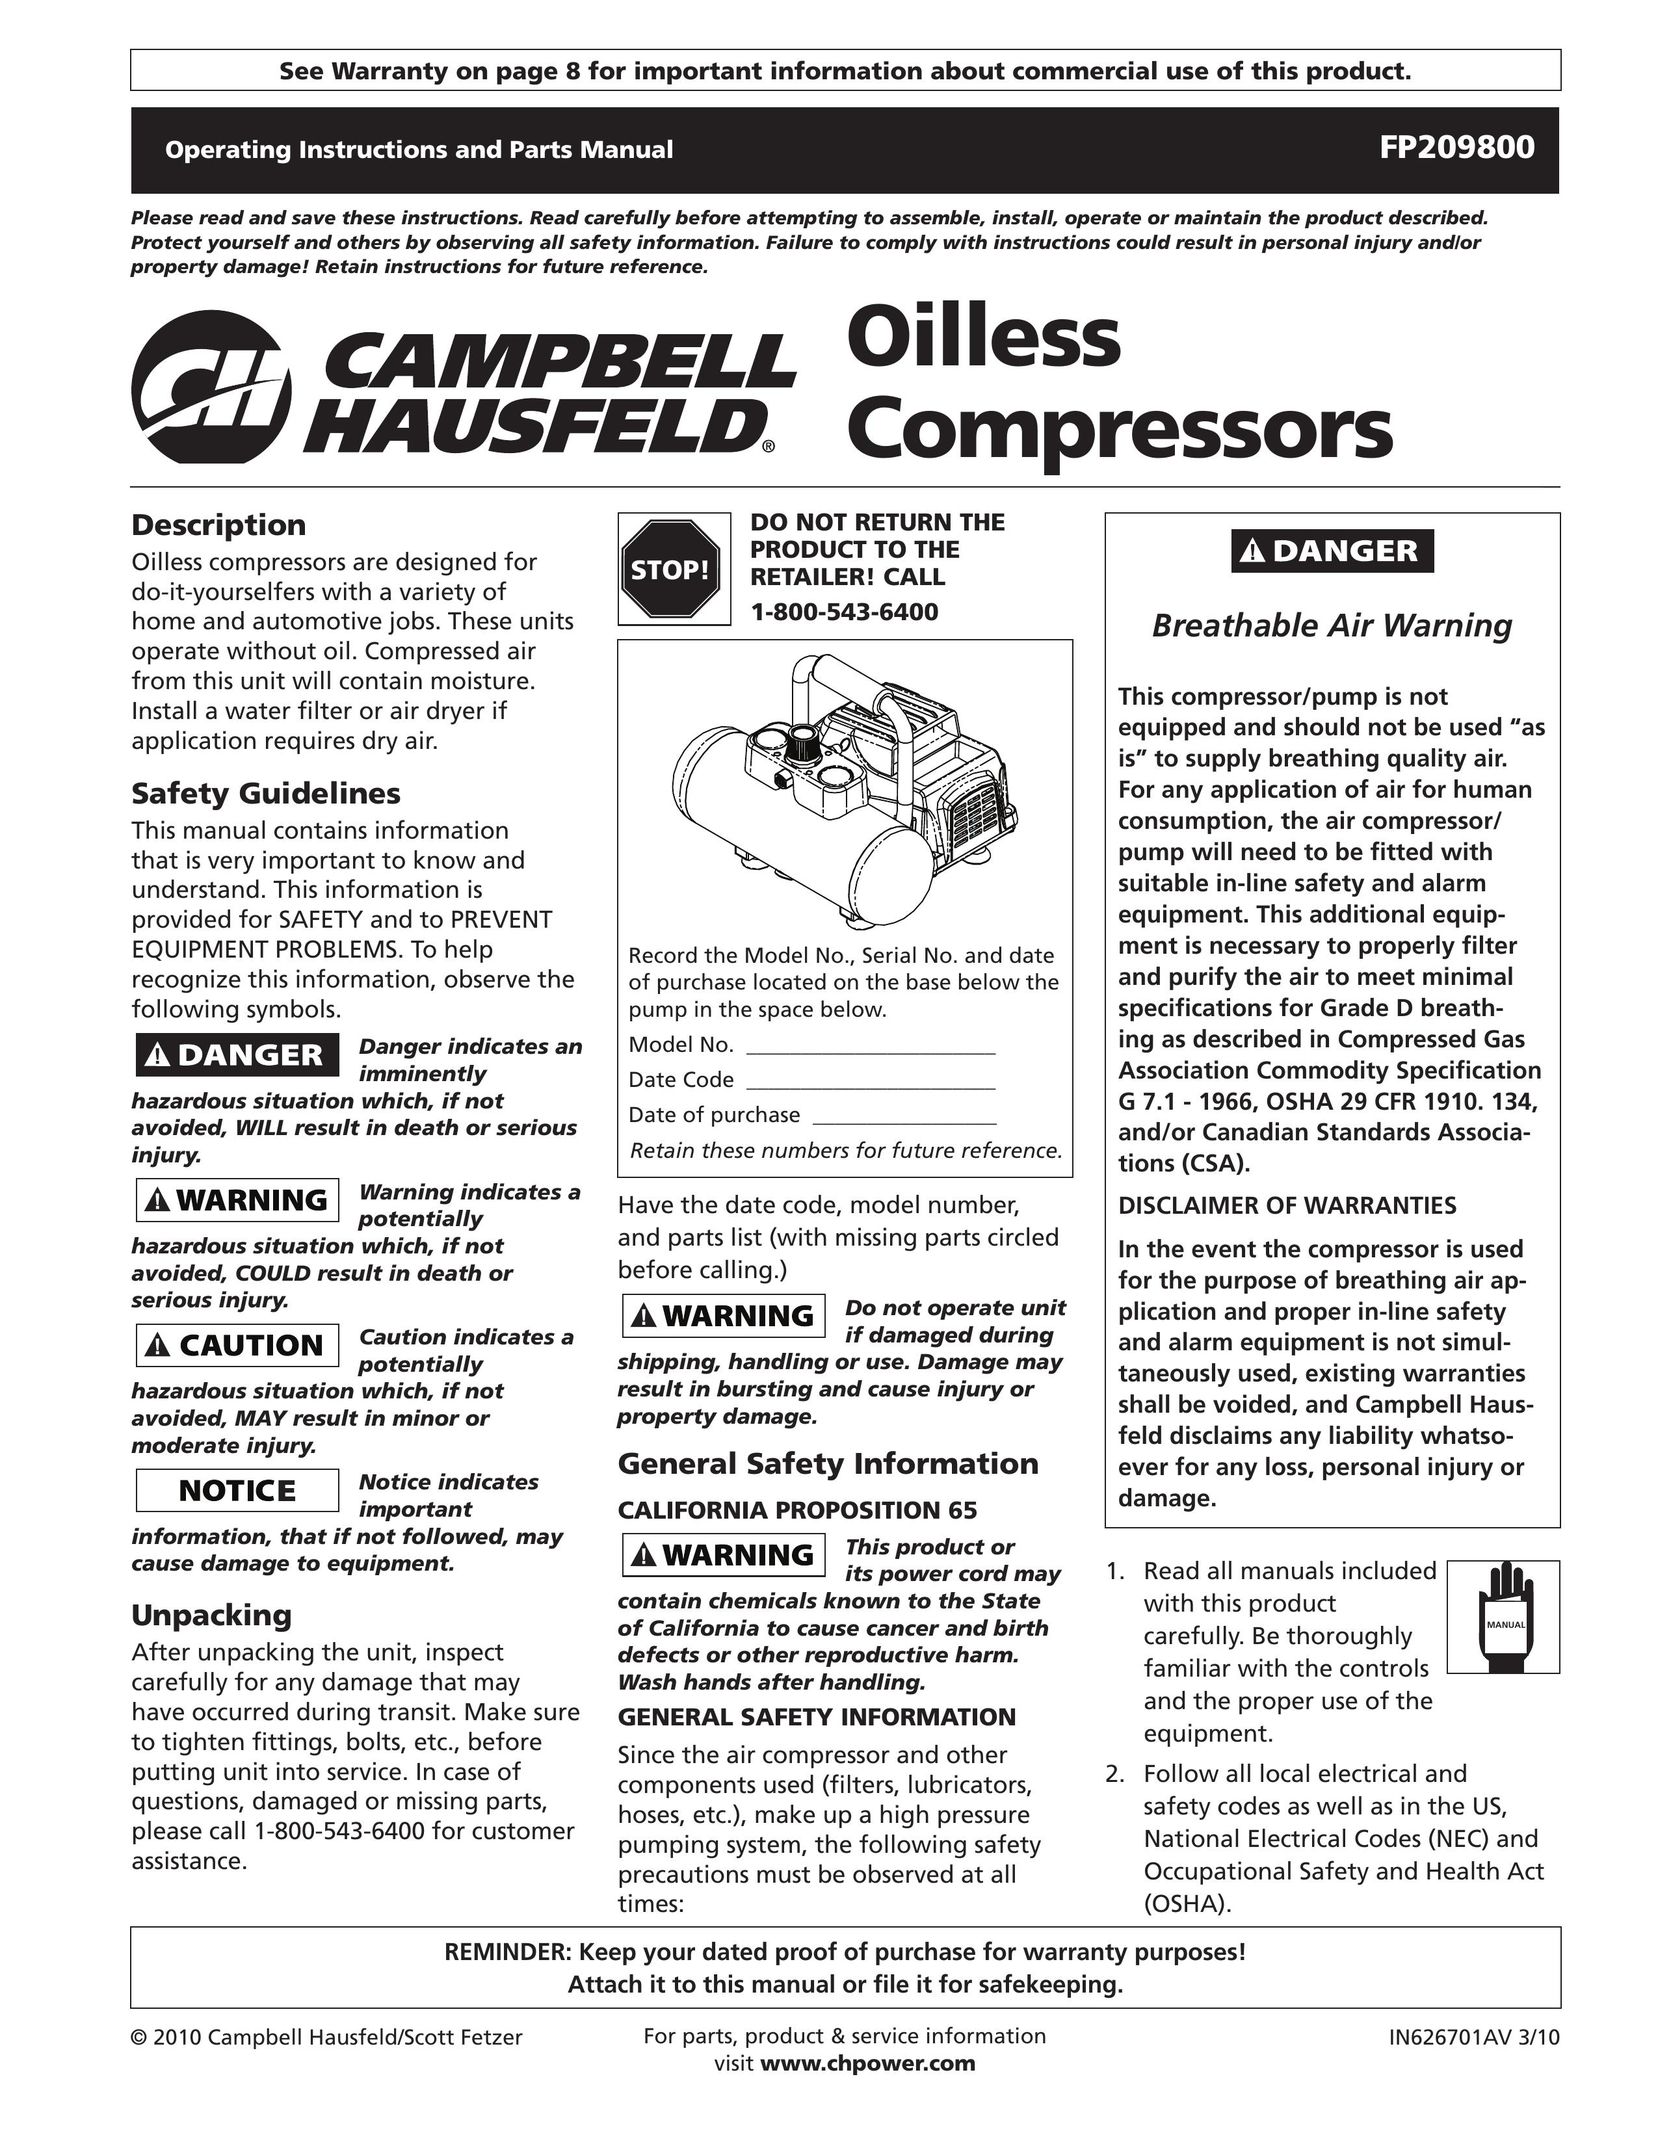 Campbell Hausfeld Attach it to this manual or file it for safekeeping. IN626701AV Air Compressor User Manual